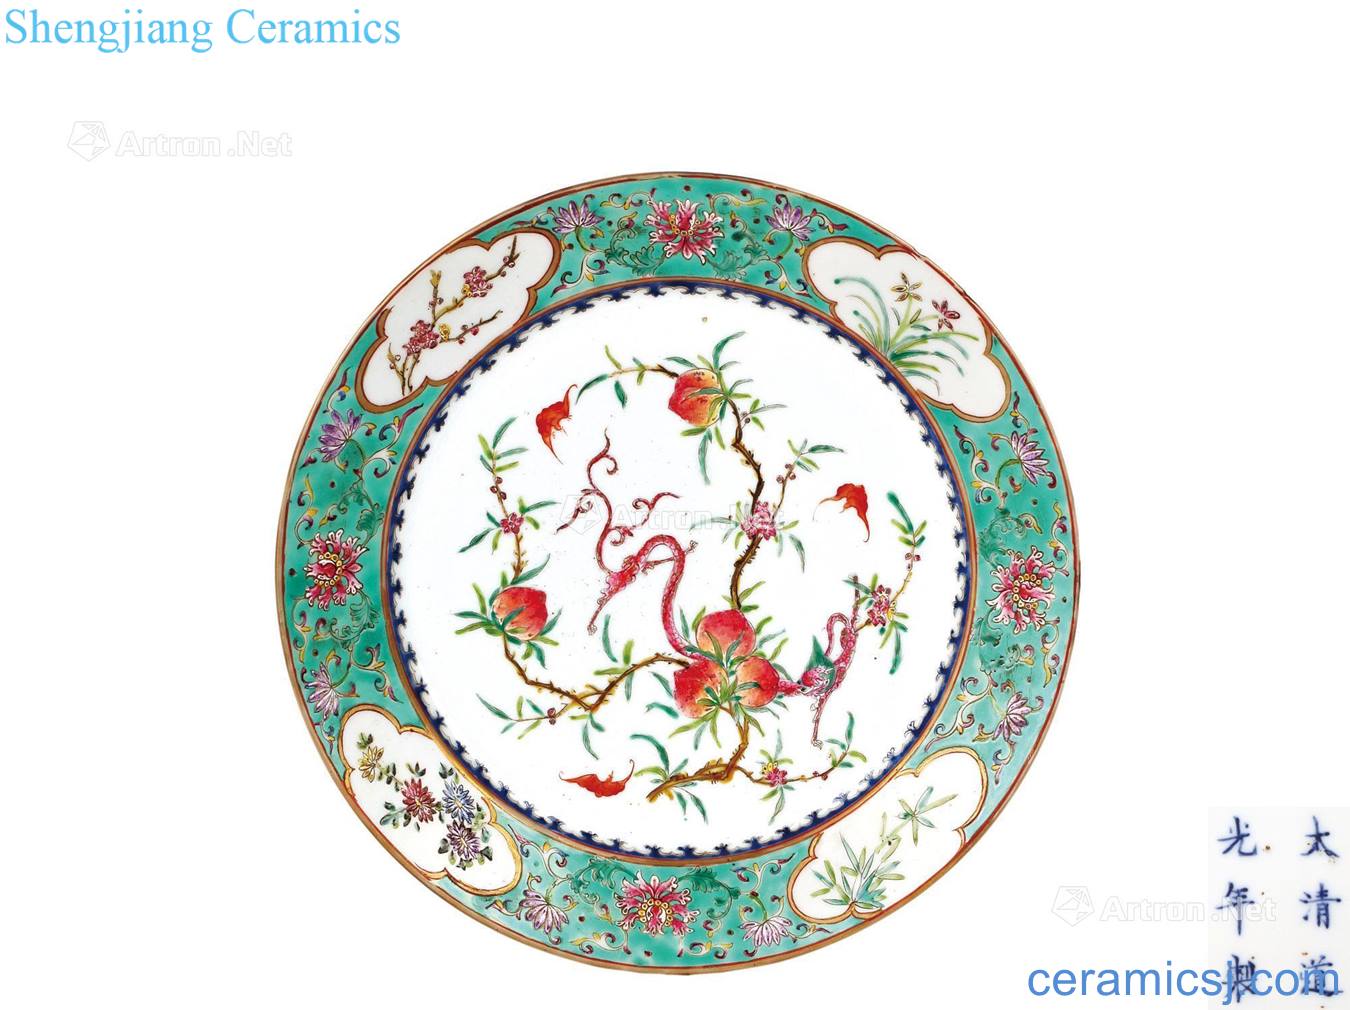 A clear light pastel live dragon pattern plate